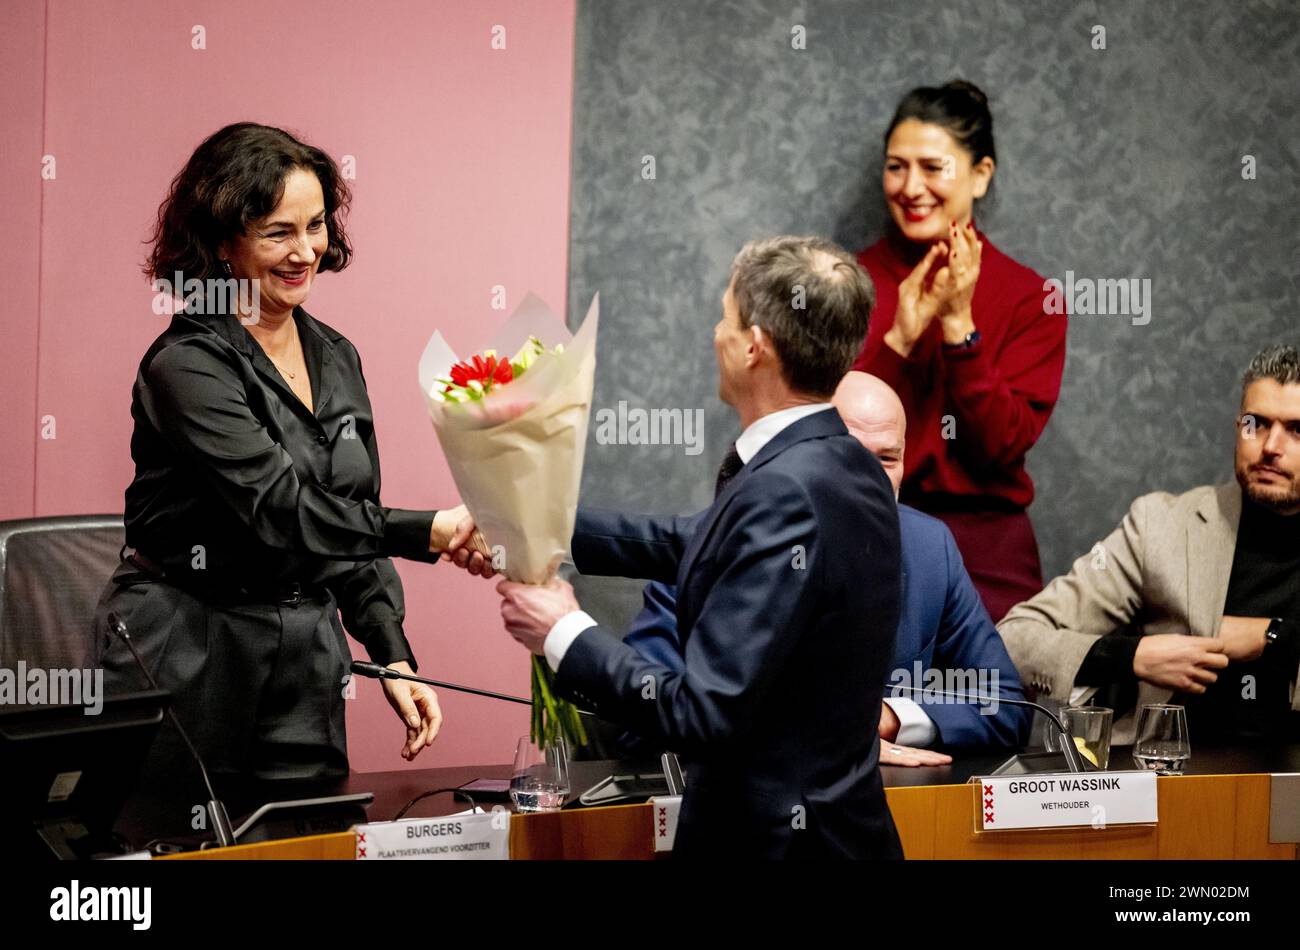 AMSTERDAM - Mayor Femke Halsema after a meeting of the Amsterdam city council, during which, among other things, her new term of office will be voted on. After a secret ballot it will become clear whether Halsema has been re-elected. ANP ROBIN UTRECHT netherlands out - belgium out Stock Photo